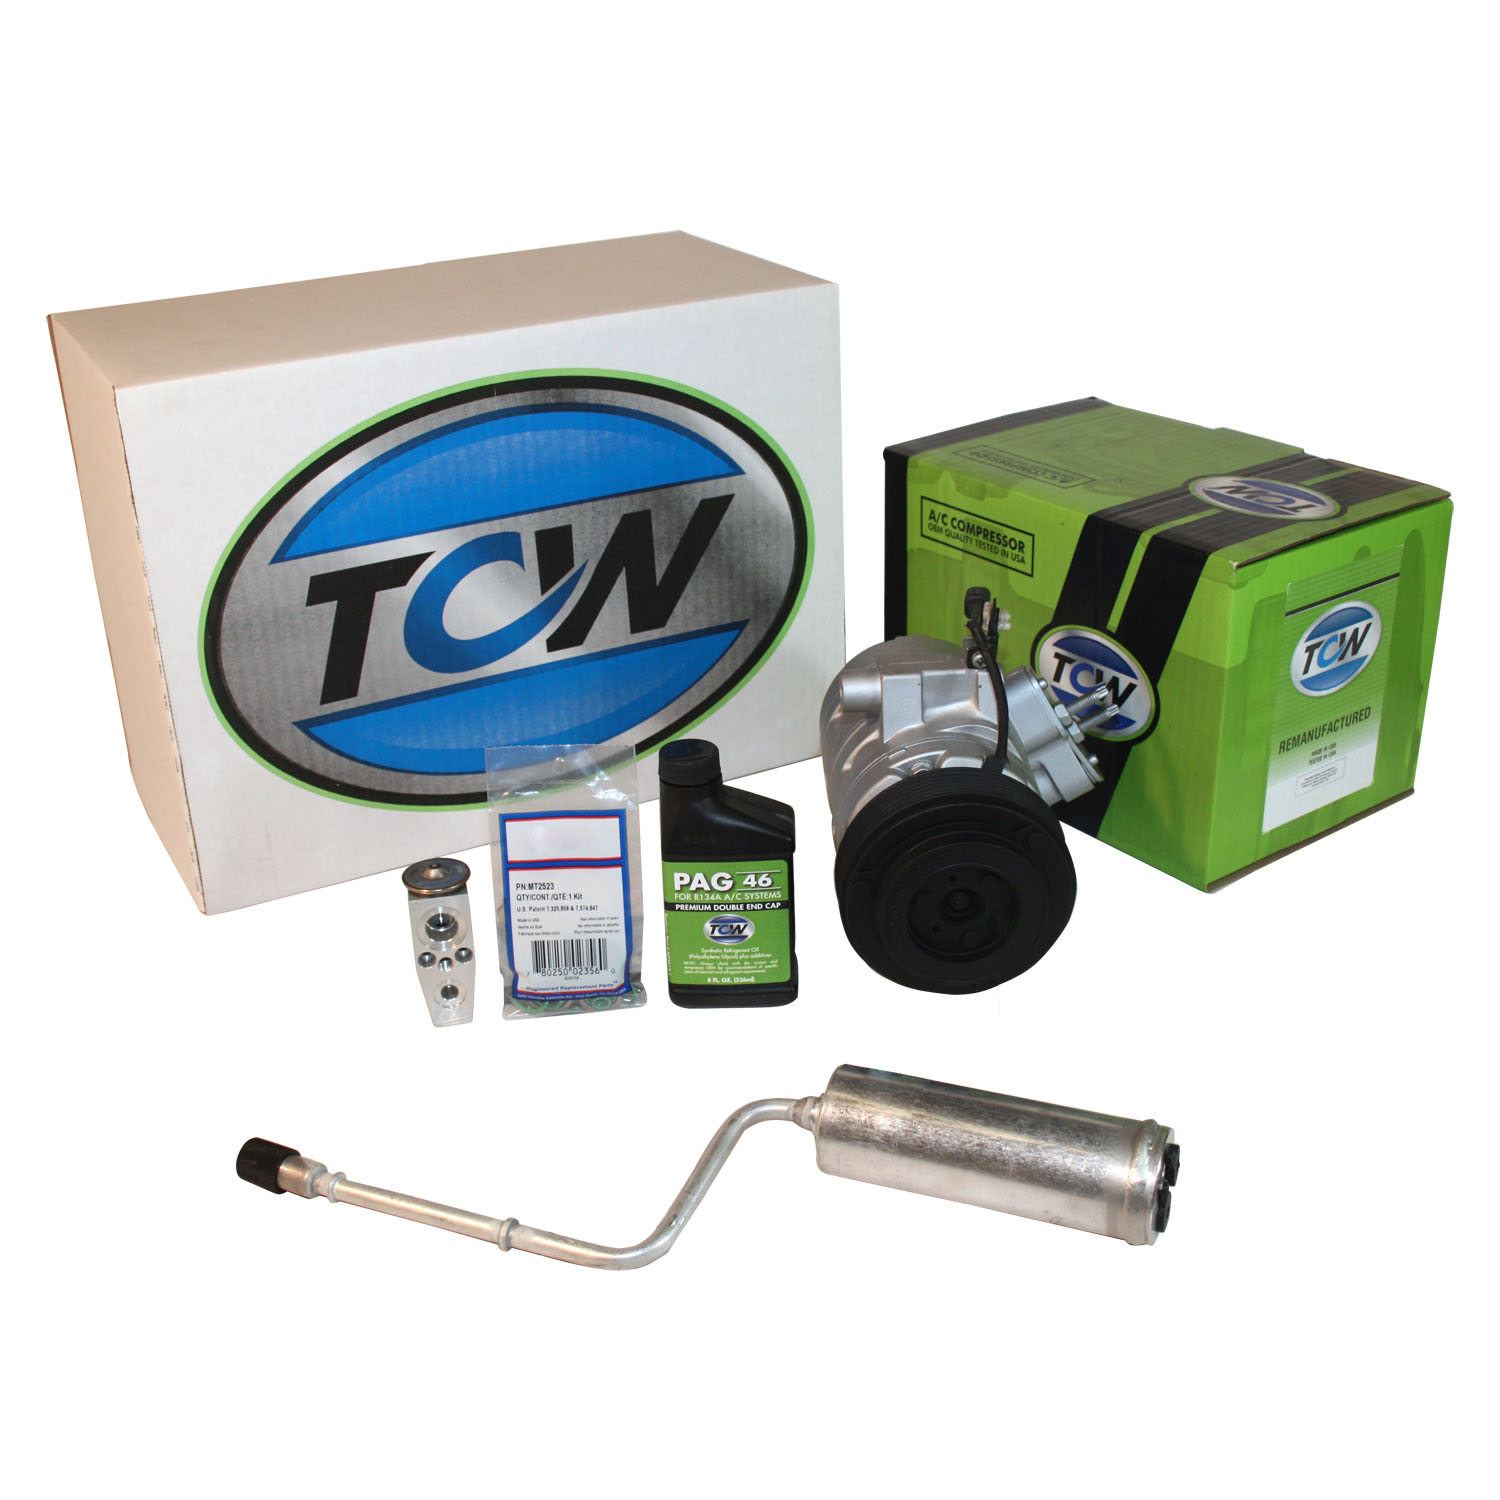 TCW Vehicle A/C Kit K1000446R Remanufactured Product Image field_60b6a13a6e67c